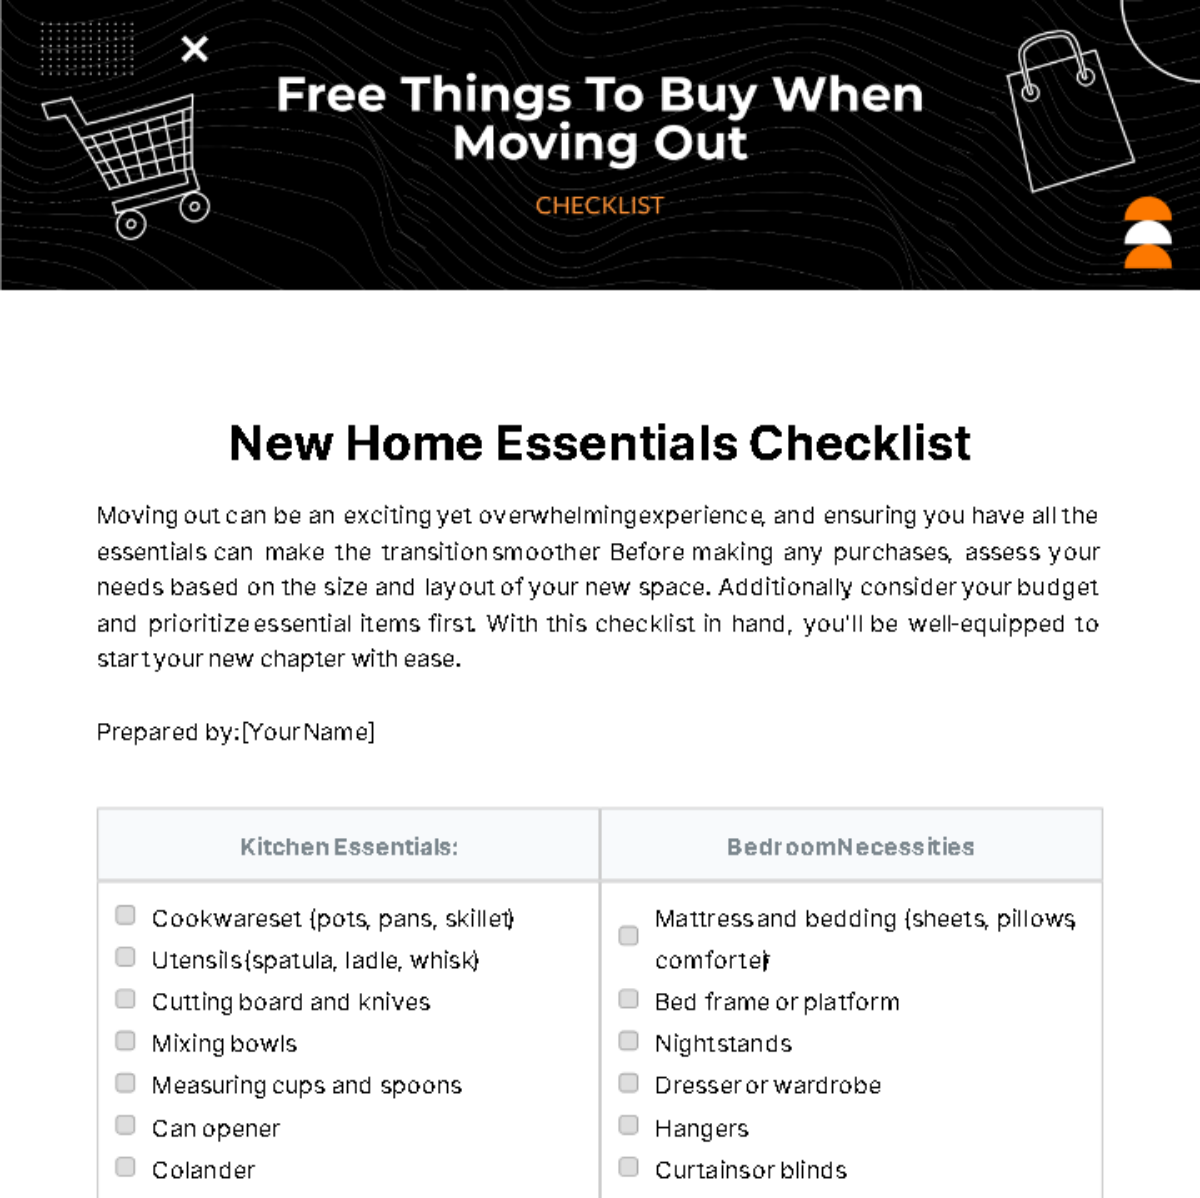 Free Things To Buy When Moving Out Checklist Template